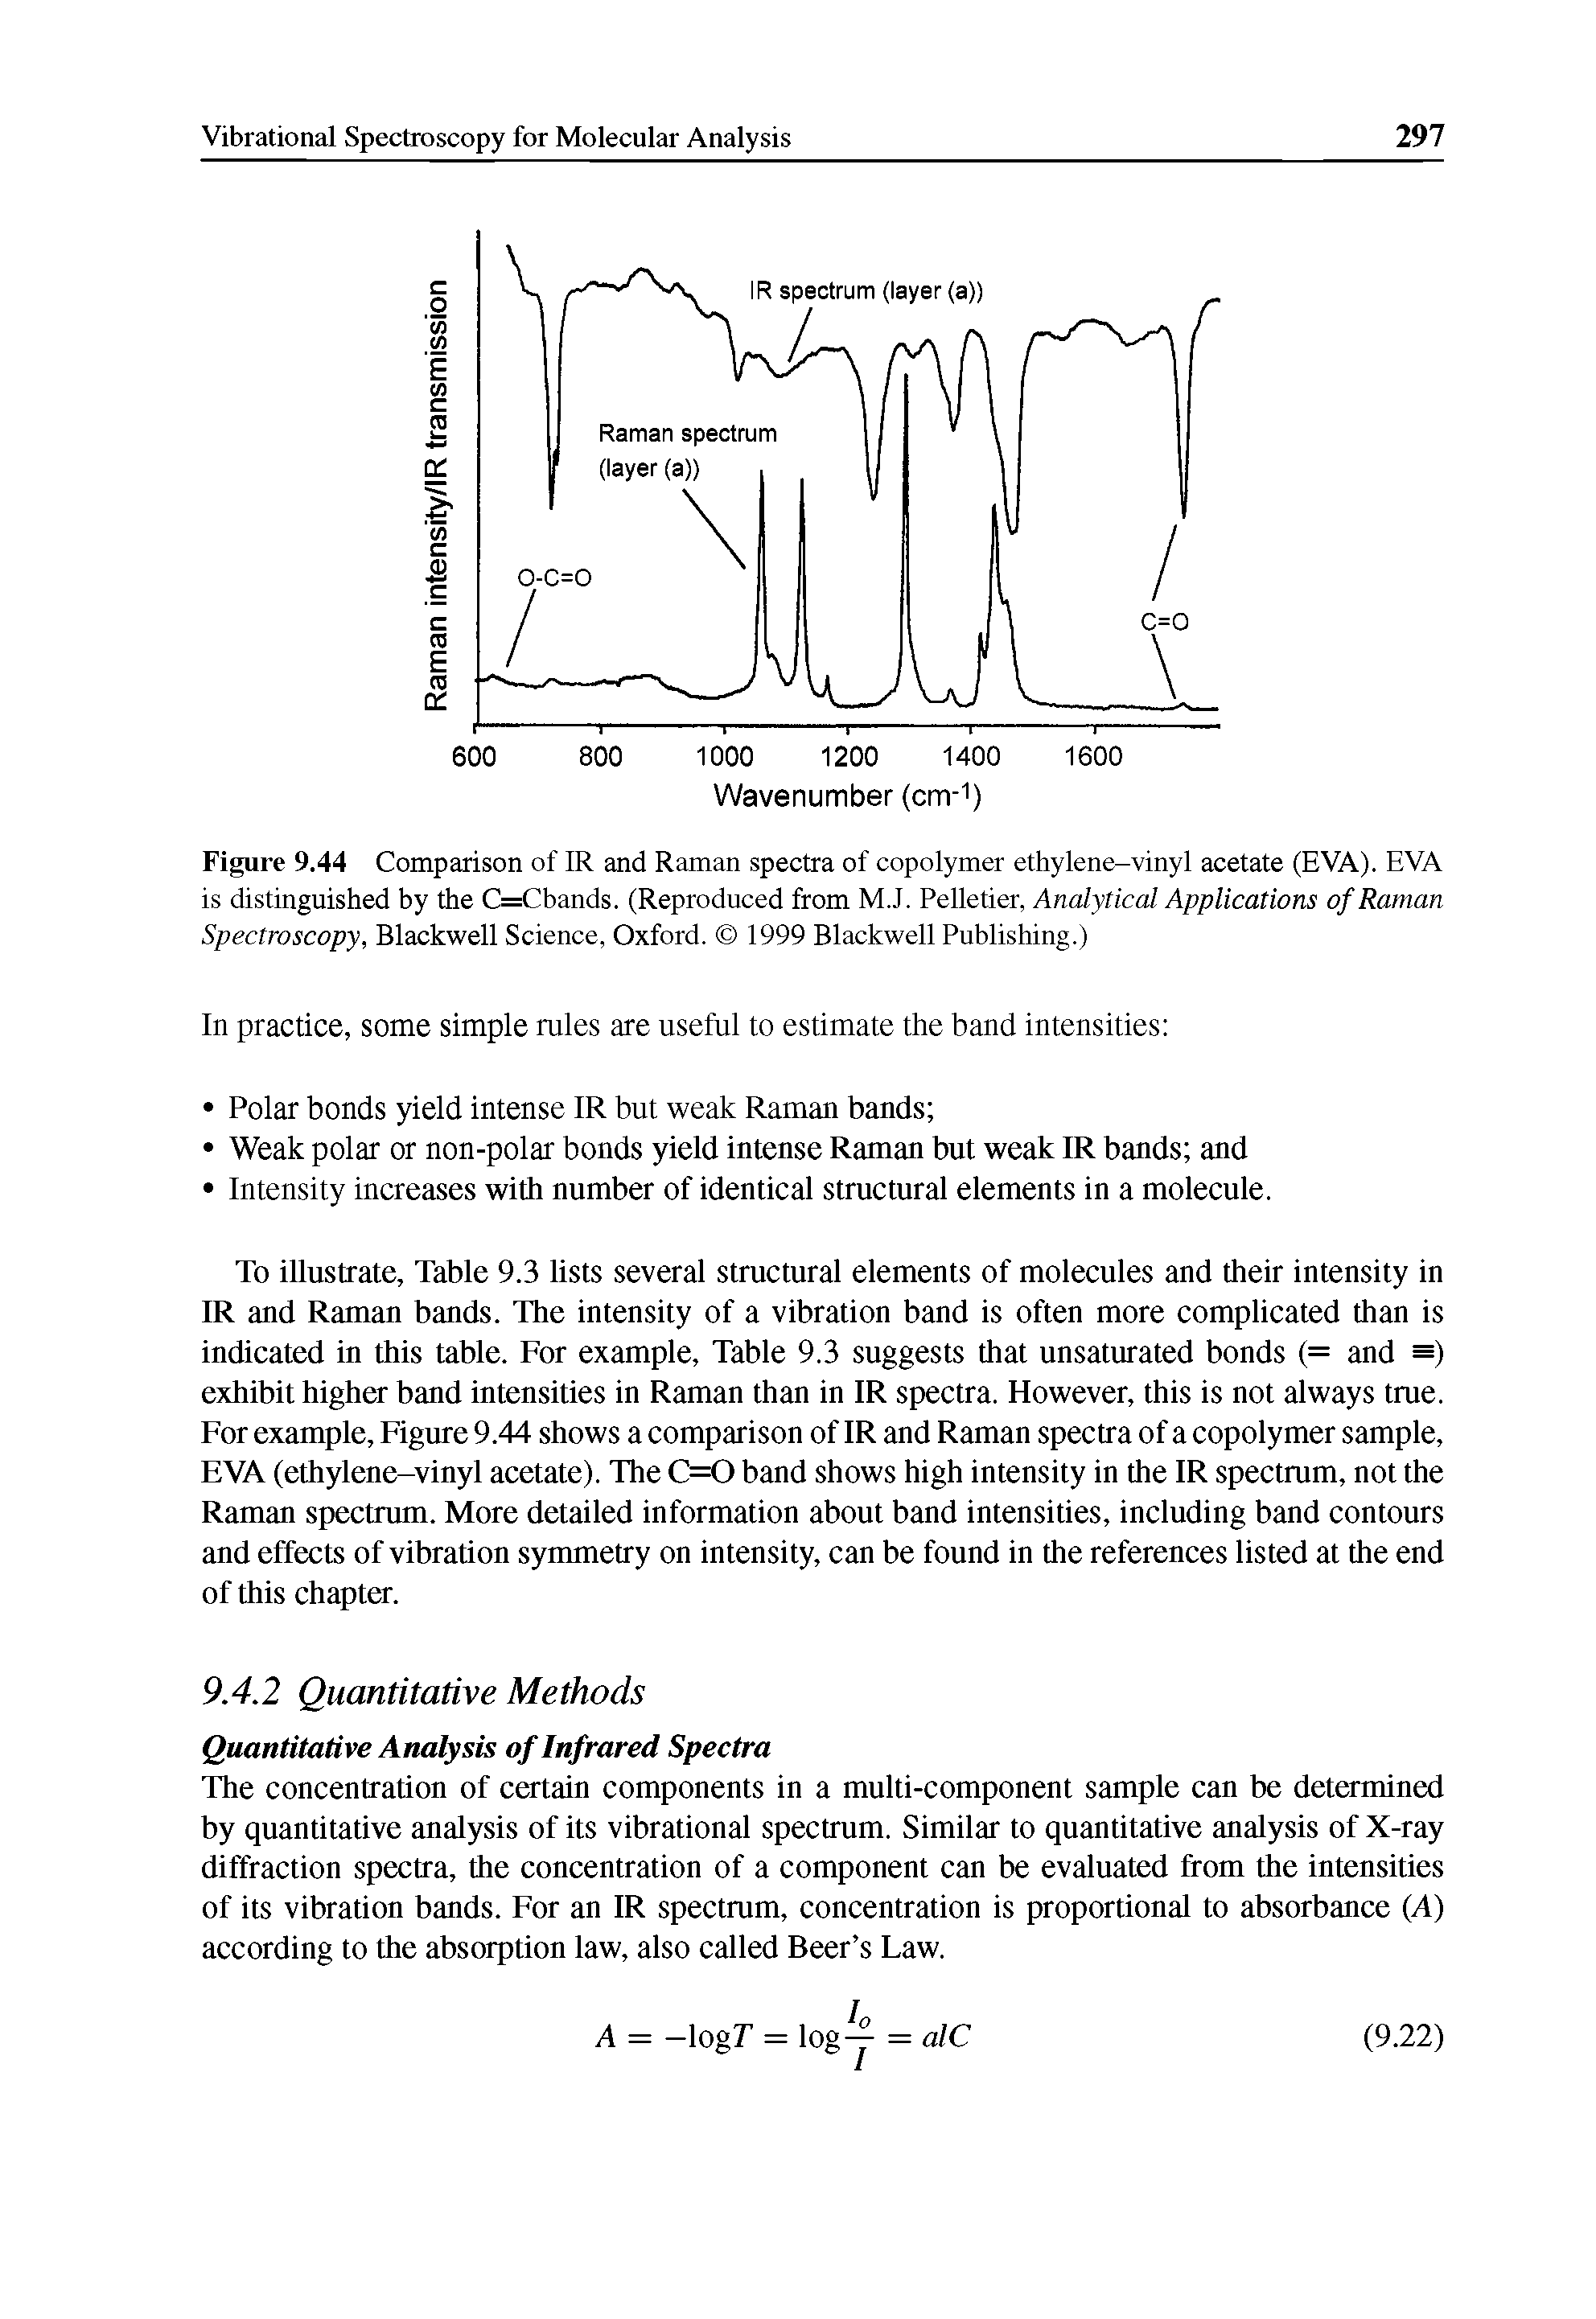 Figure 9.44 Comparison of IR and Raman spectra of copolymer ethylene-vinyl acetate (EVA). EVA is distinguished by the C=Cbands. (Reproduced from M. J. Pelletier, Analytical Applications of Raman Spectroscopy, Blackwell Science, Oxford. 1999 Blackwell Publishing.)...